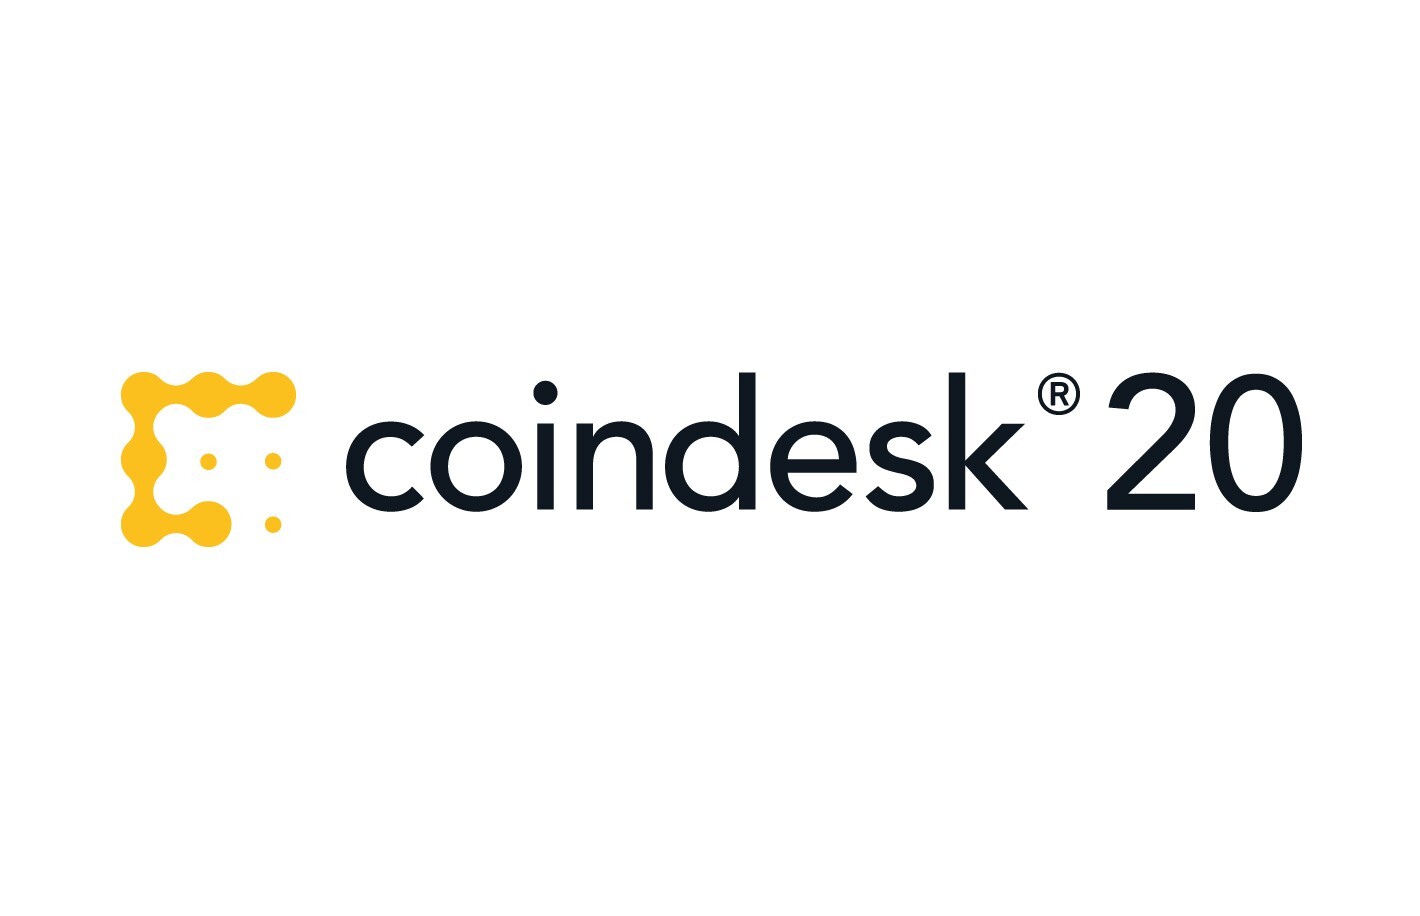 Introducing-the-coindesk-20:-the-assets-that-matter-most-in-crypto